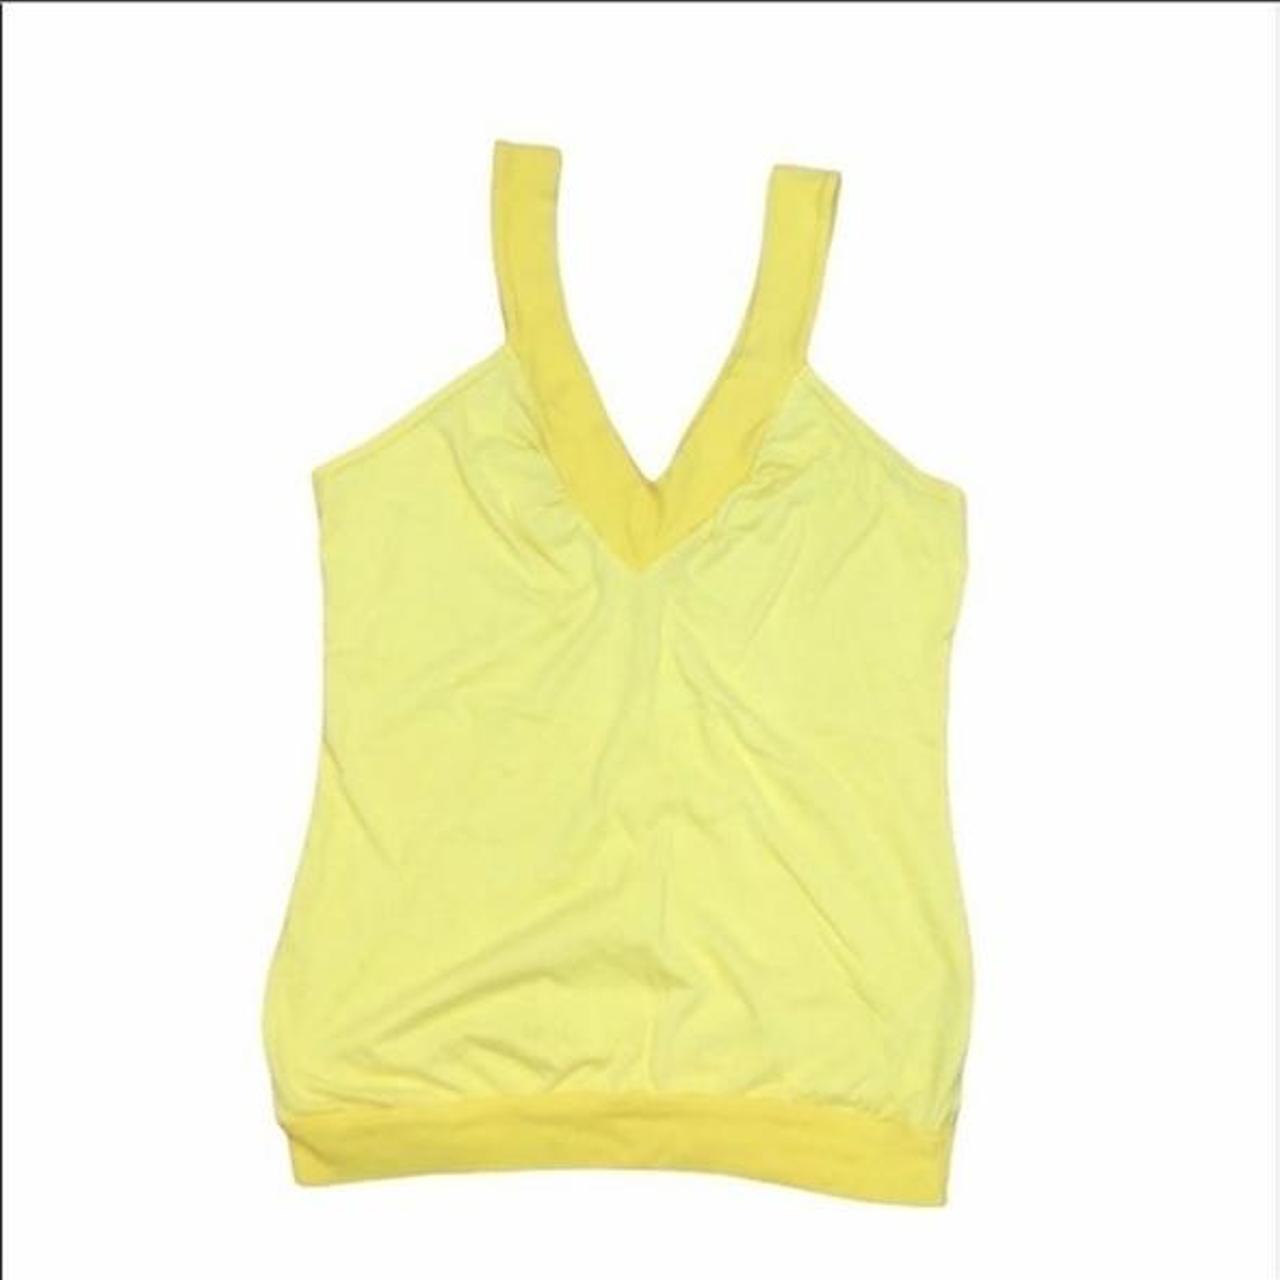 Urban Outfitters Women's Vests-tanks-camis